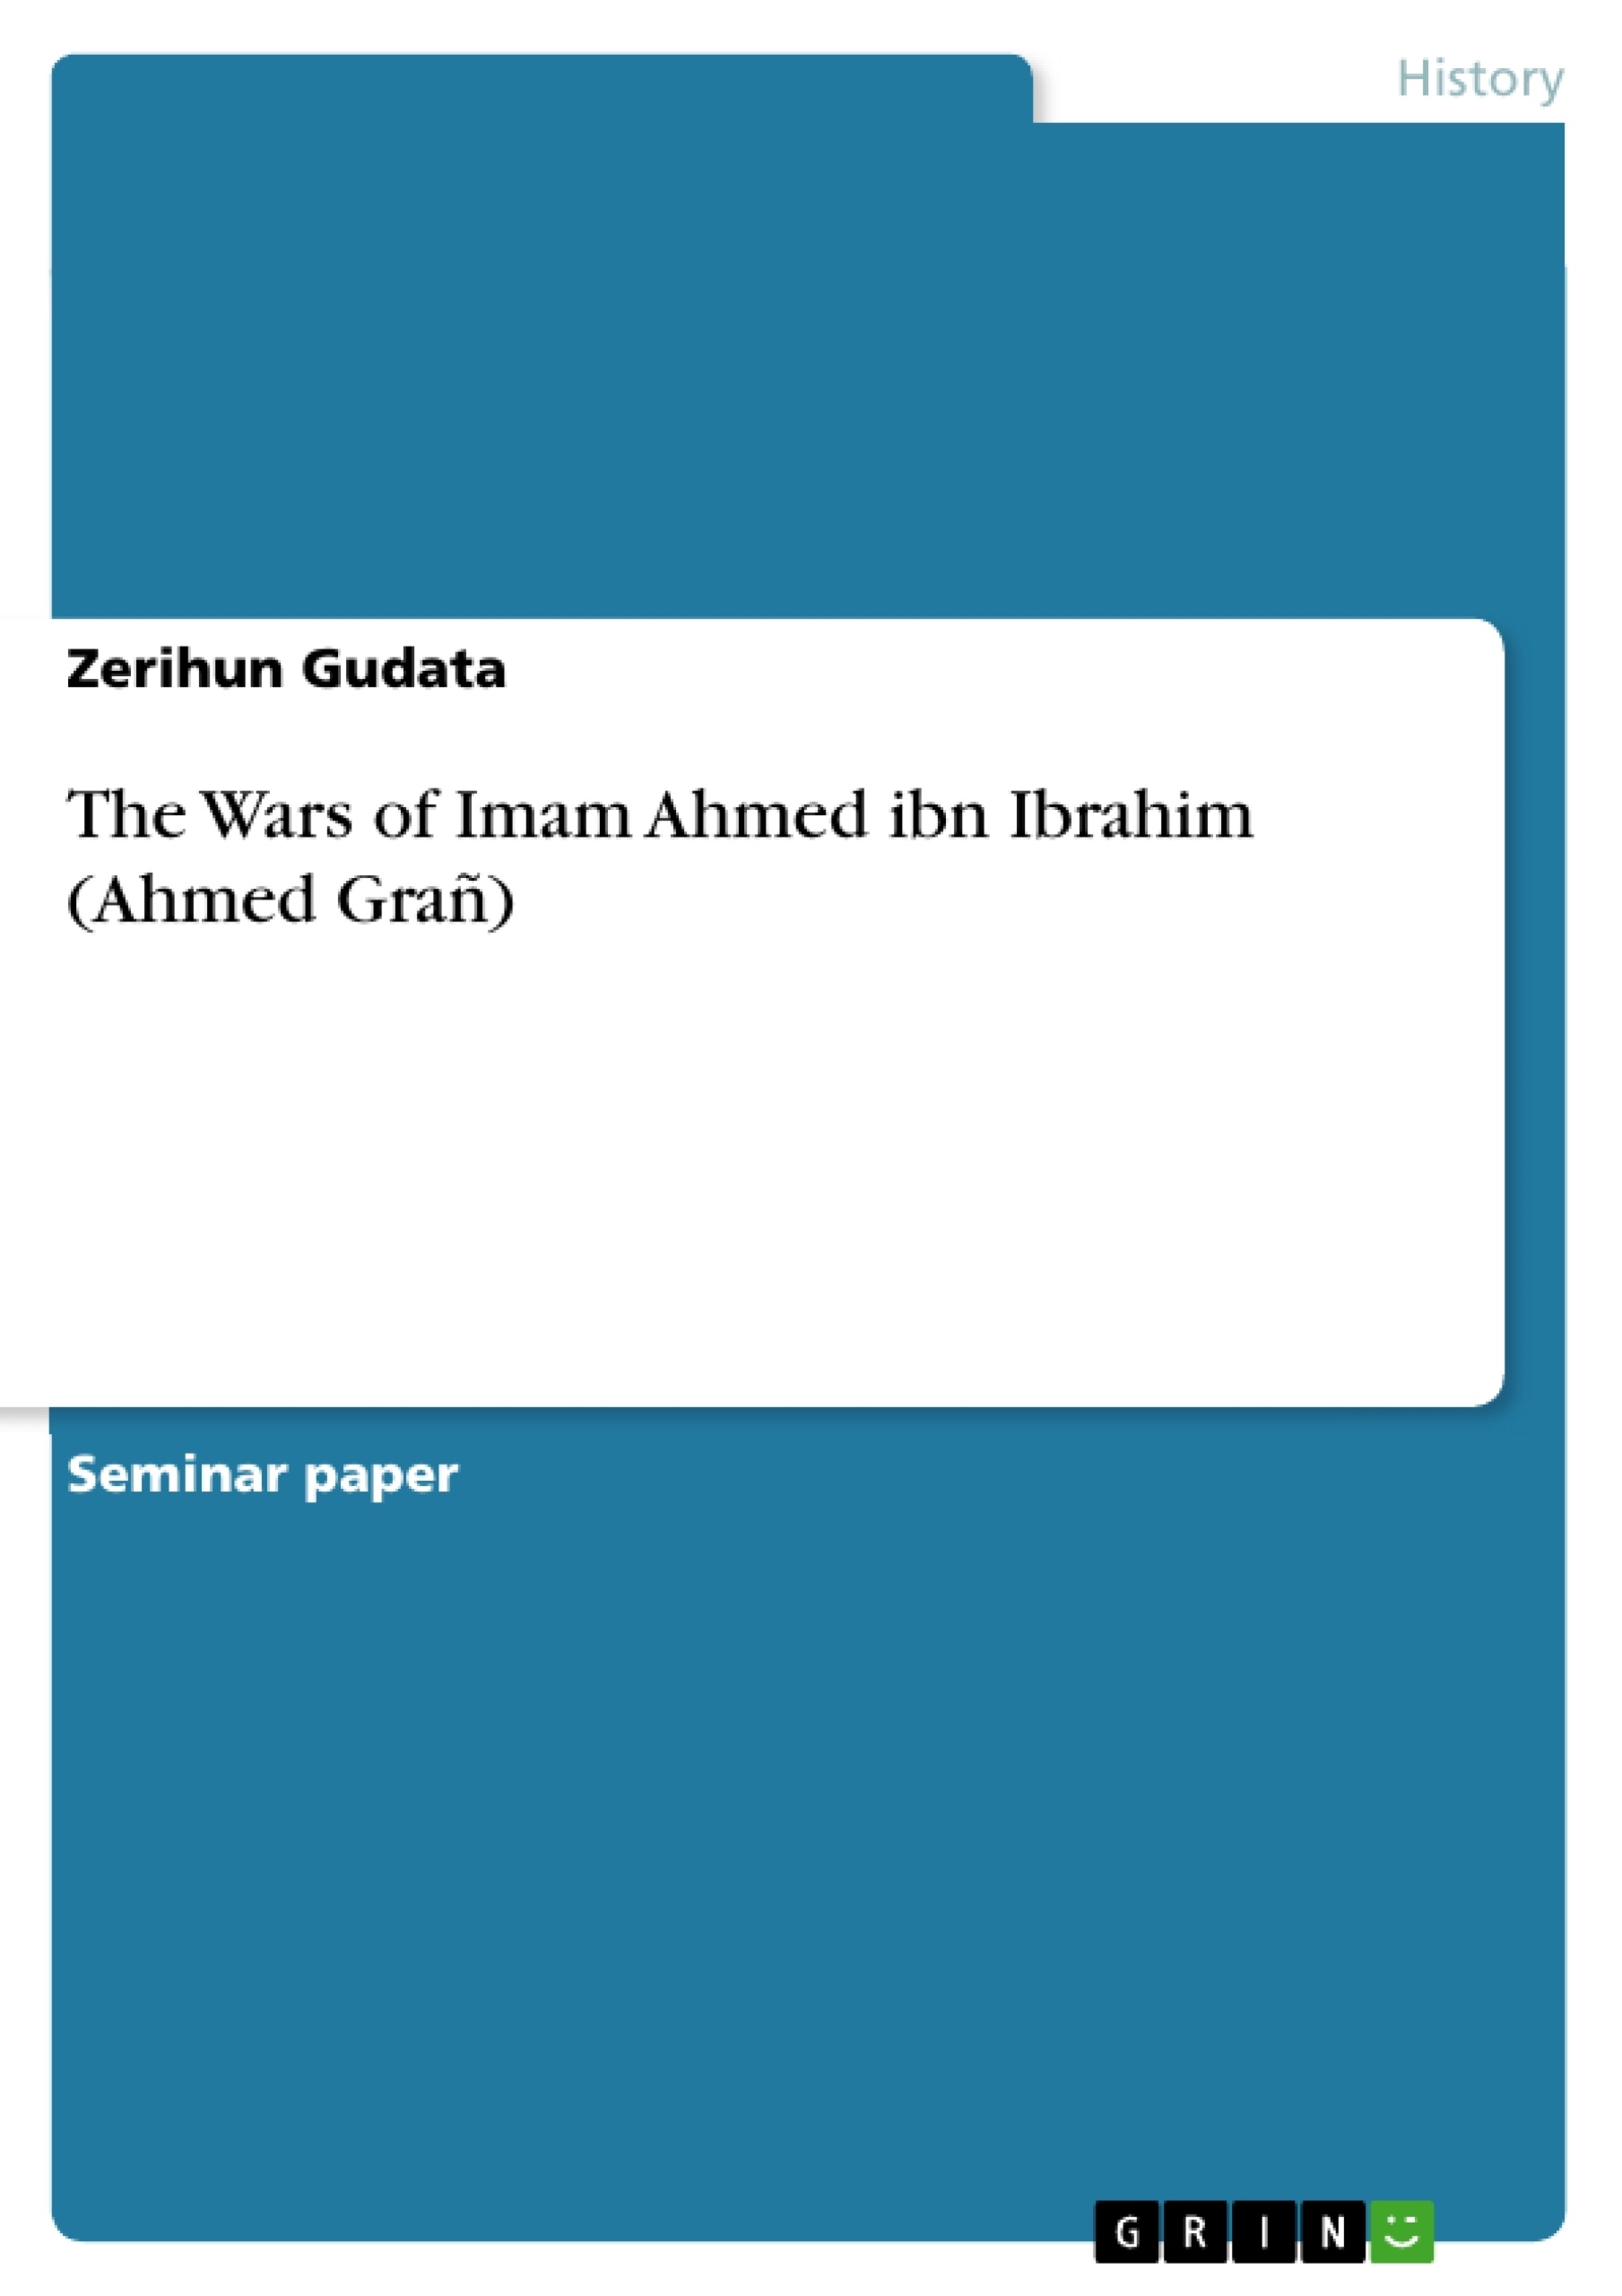 Title: The Wars of Imam Ahmed ibn Ibrahim (Ahmed Grañ)